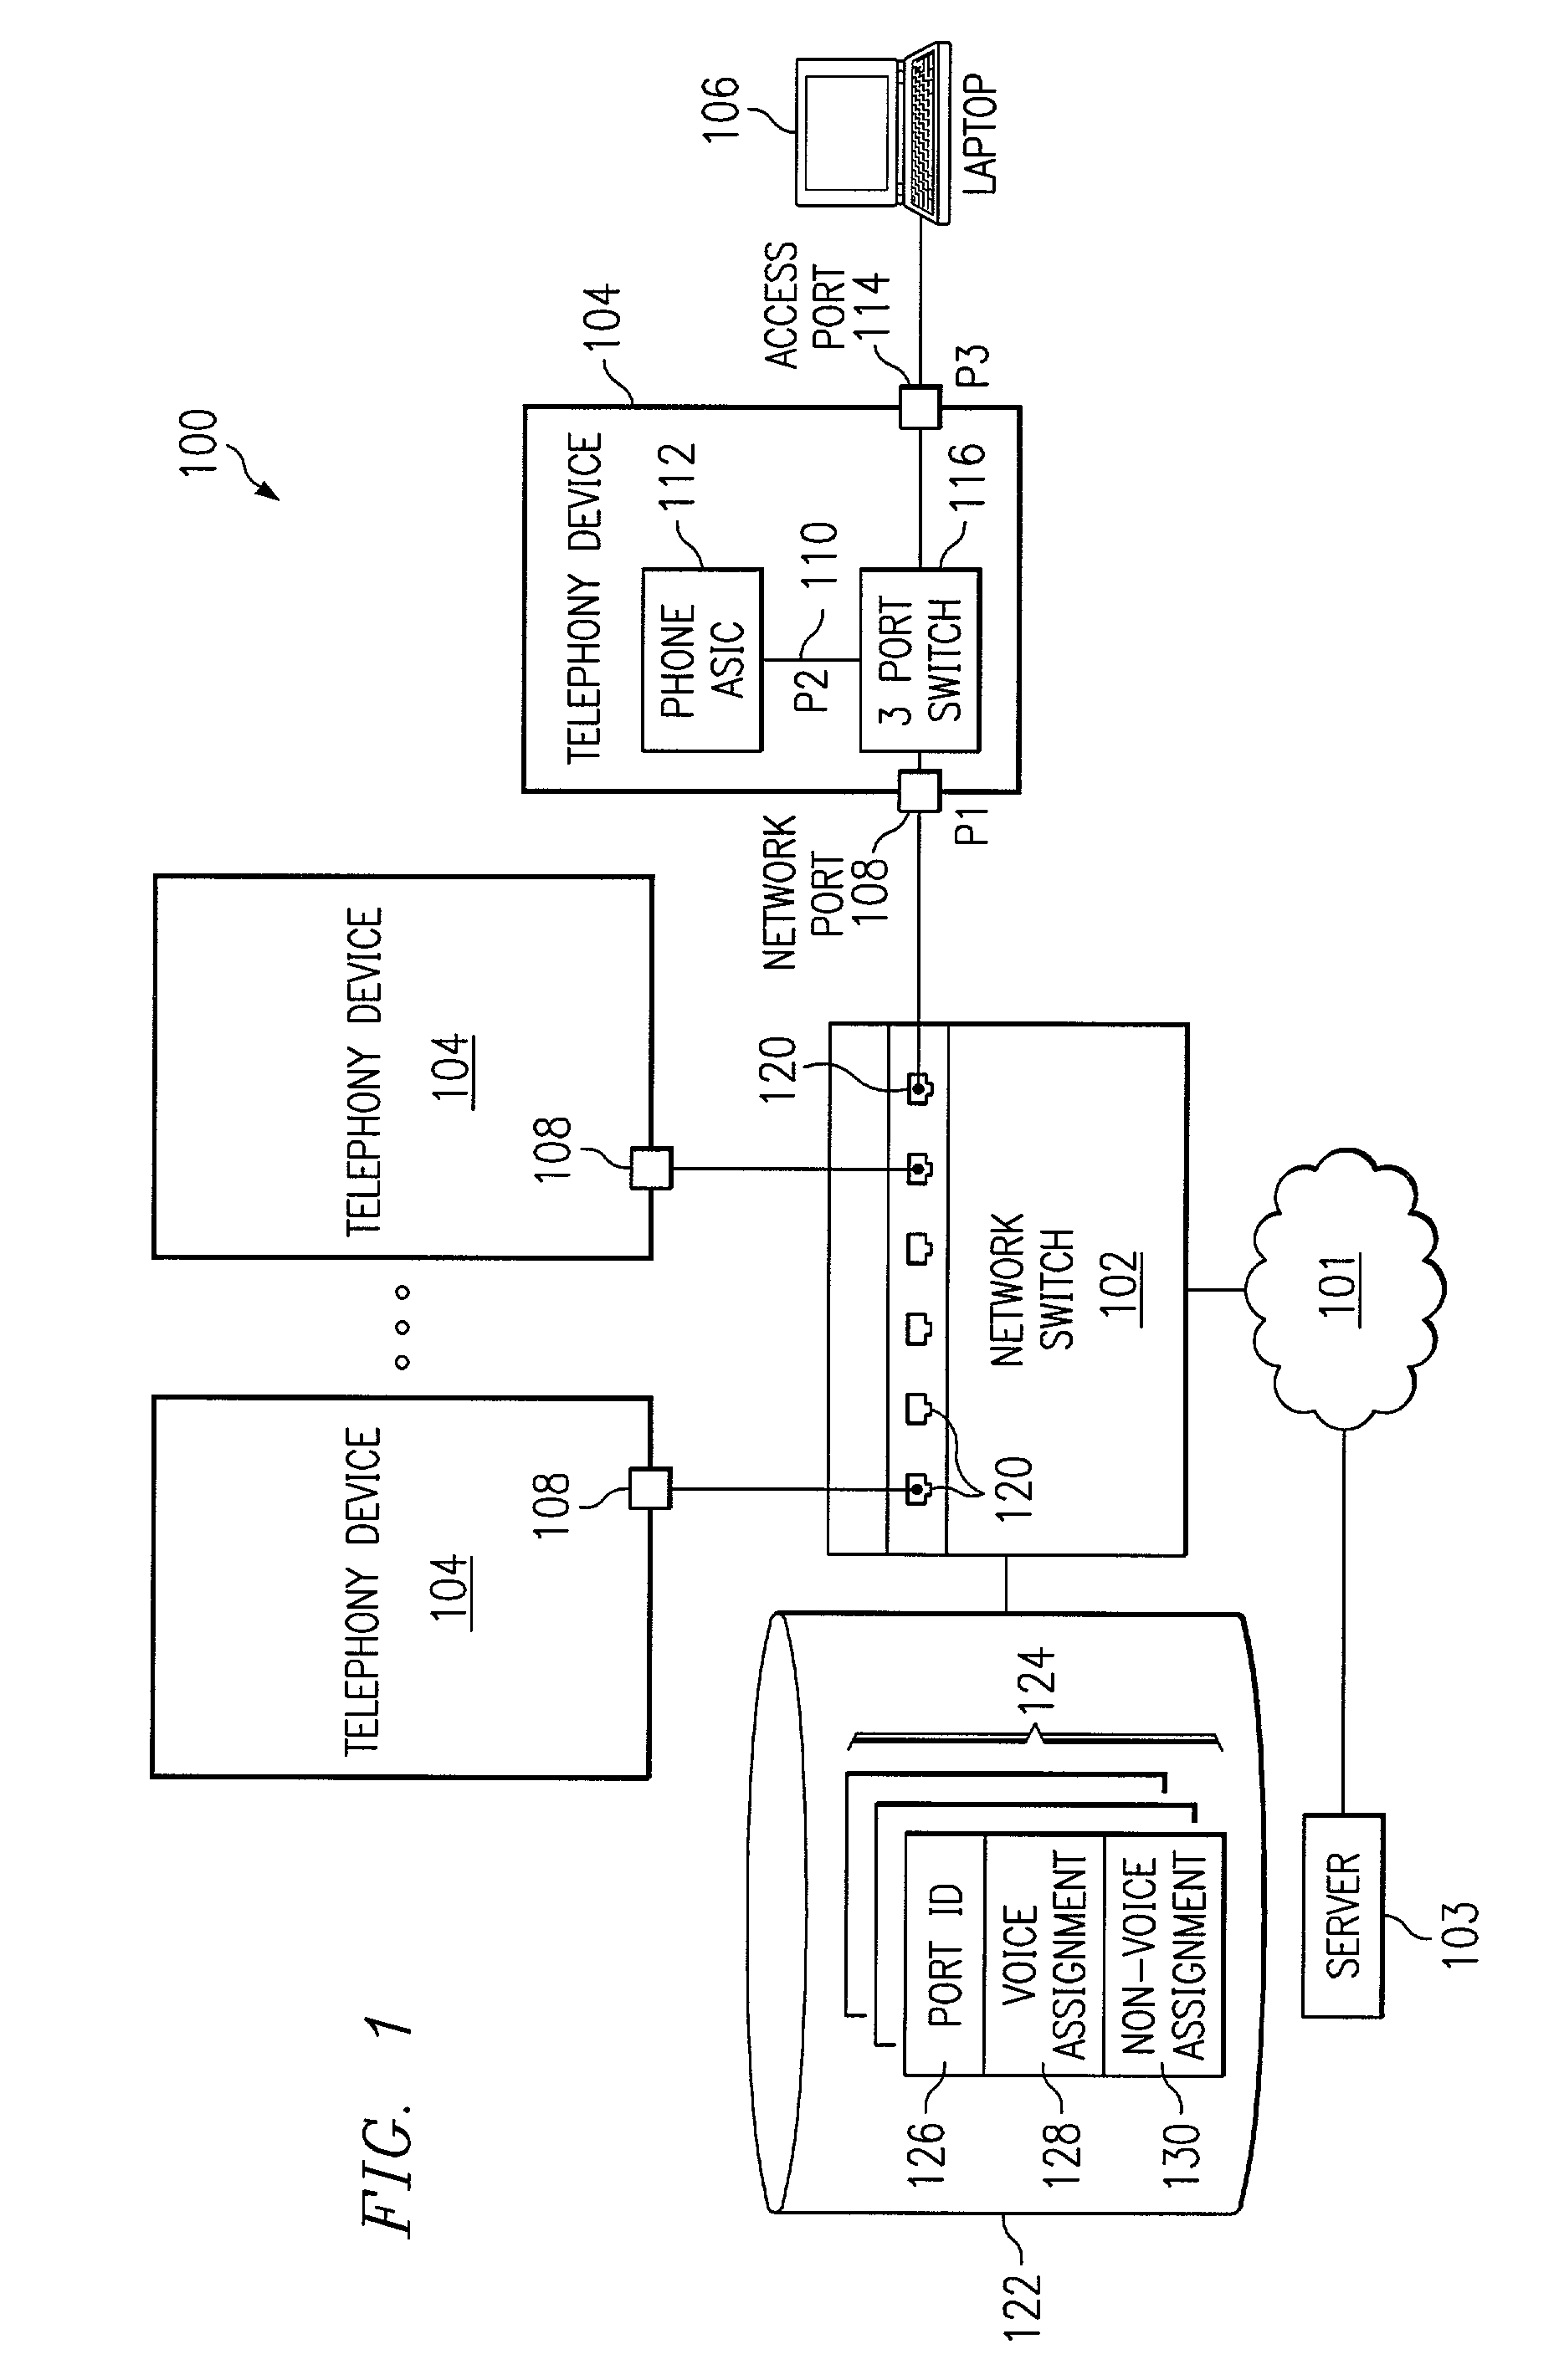 Method for regulating power for voice over Internet Protocol telephones